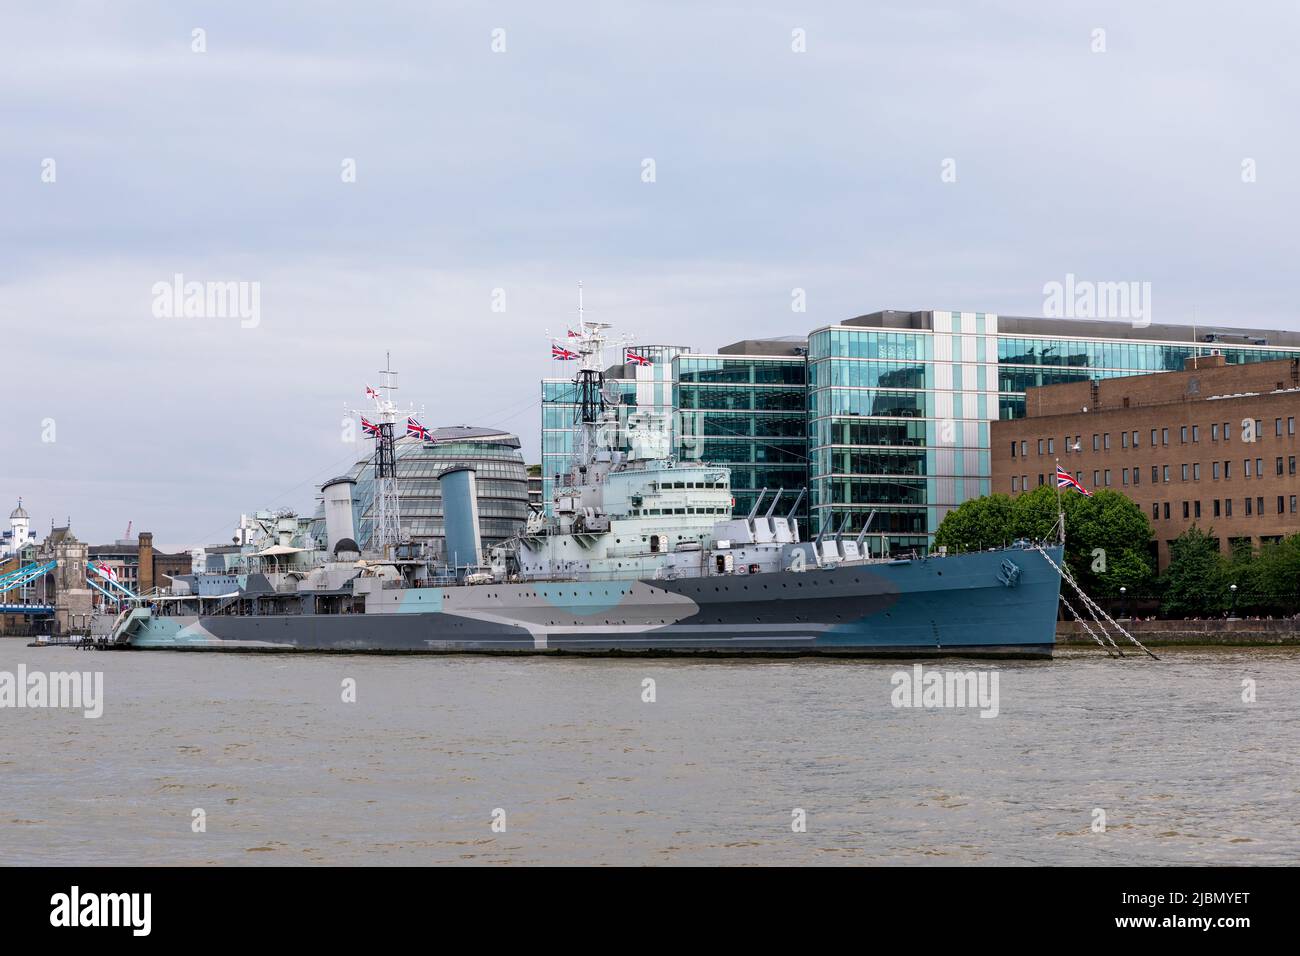 HMS Belfast moored on the river thames Stock Photo